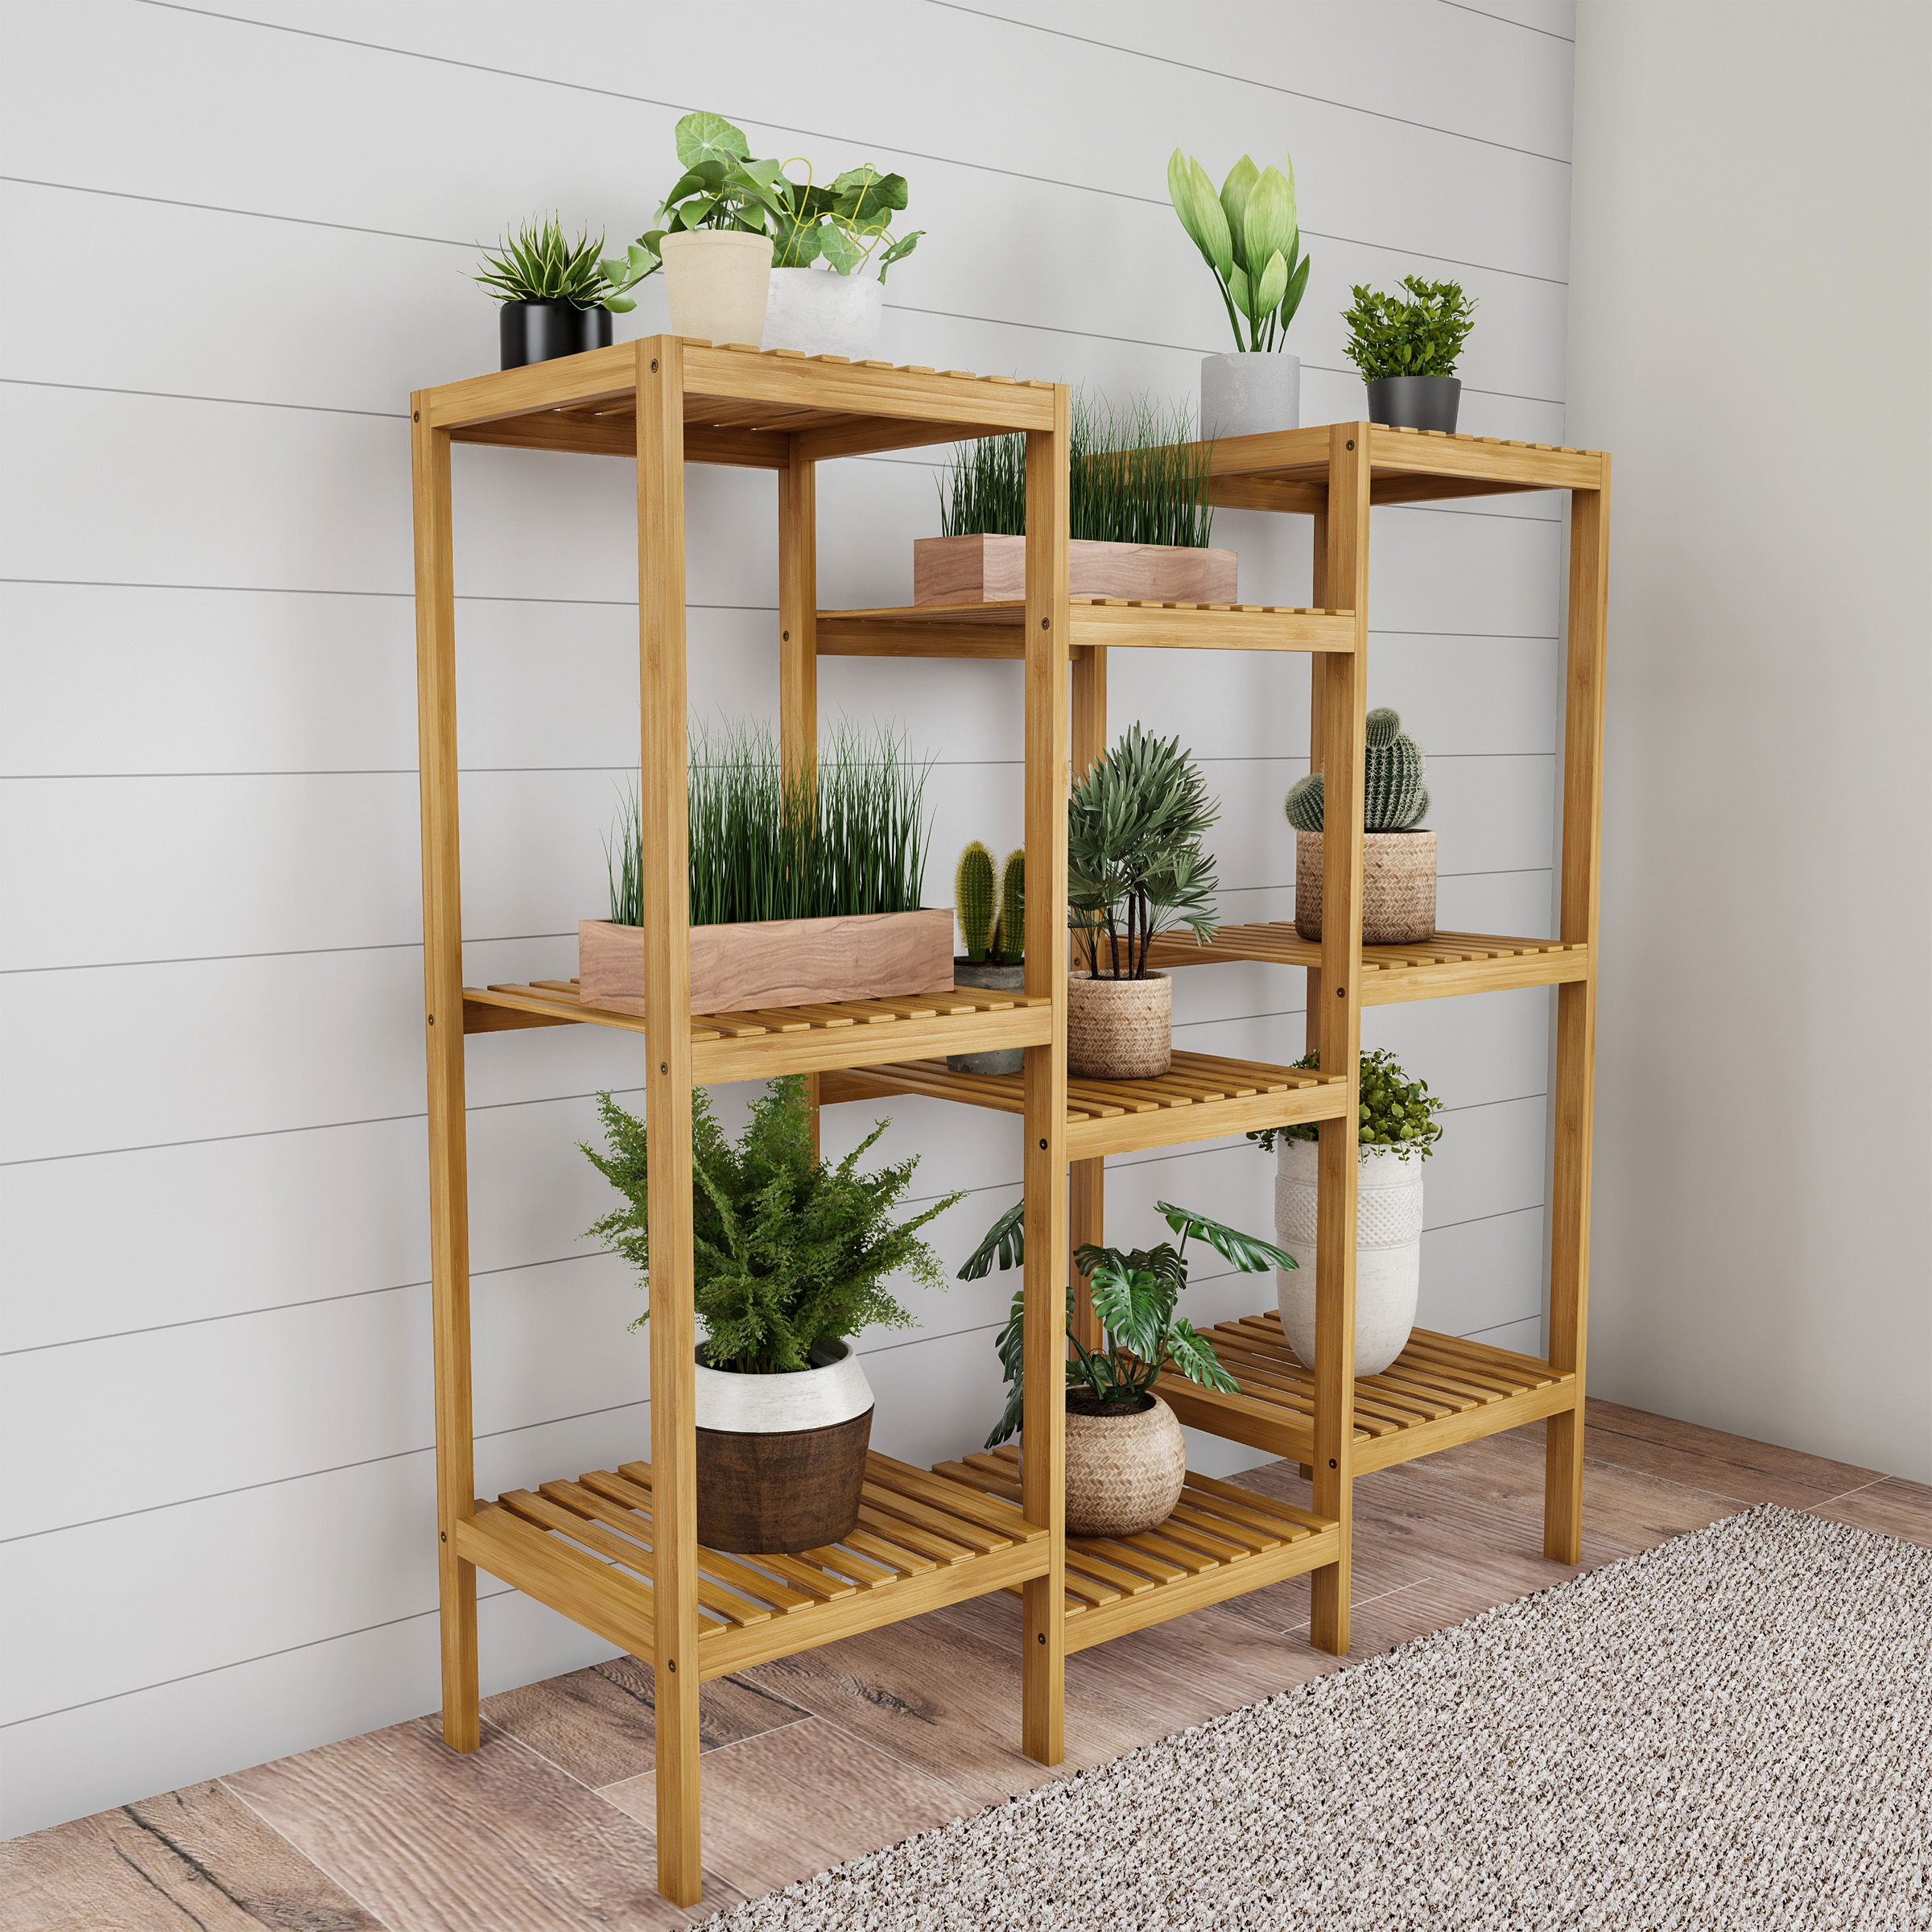 Multi-Level Plant Stand-Freestanding 9 Shelf Bamboo Storage Rack-Indoor/Outdoor Shelving Unit For Flowerpots, Planters, Shoes & Display